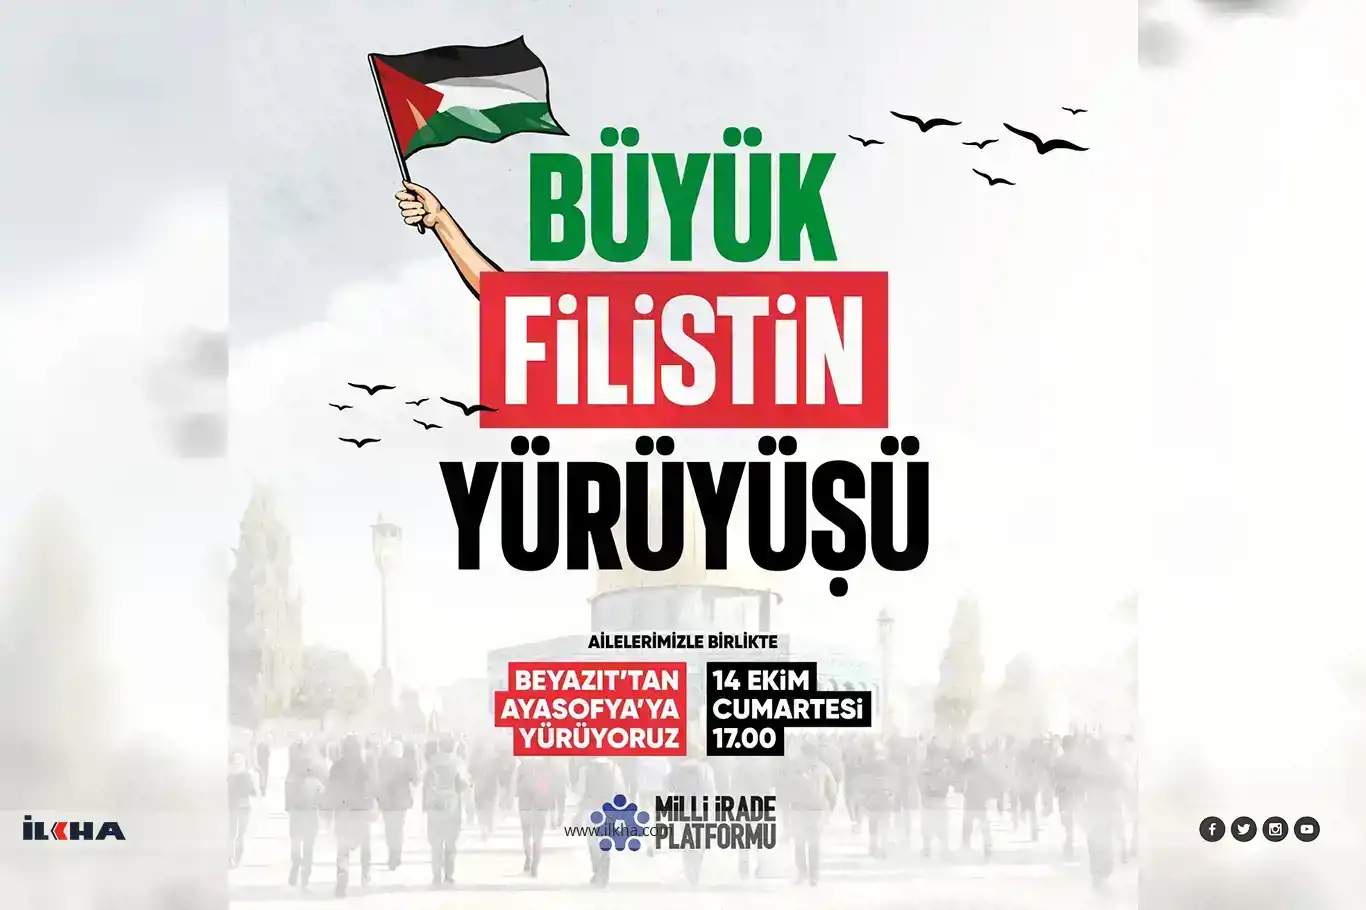 Istanbul gears up for 'Great Palestine March' in solidarity with Gaza